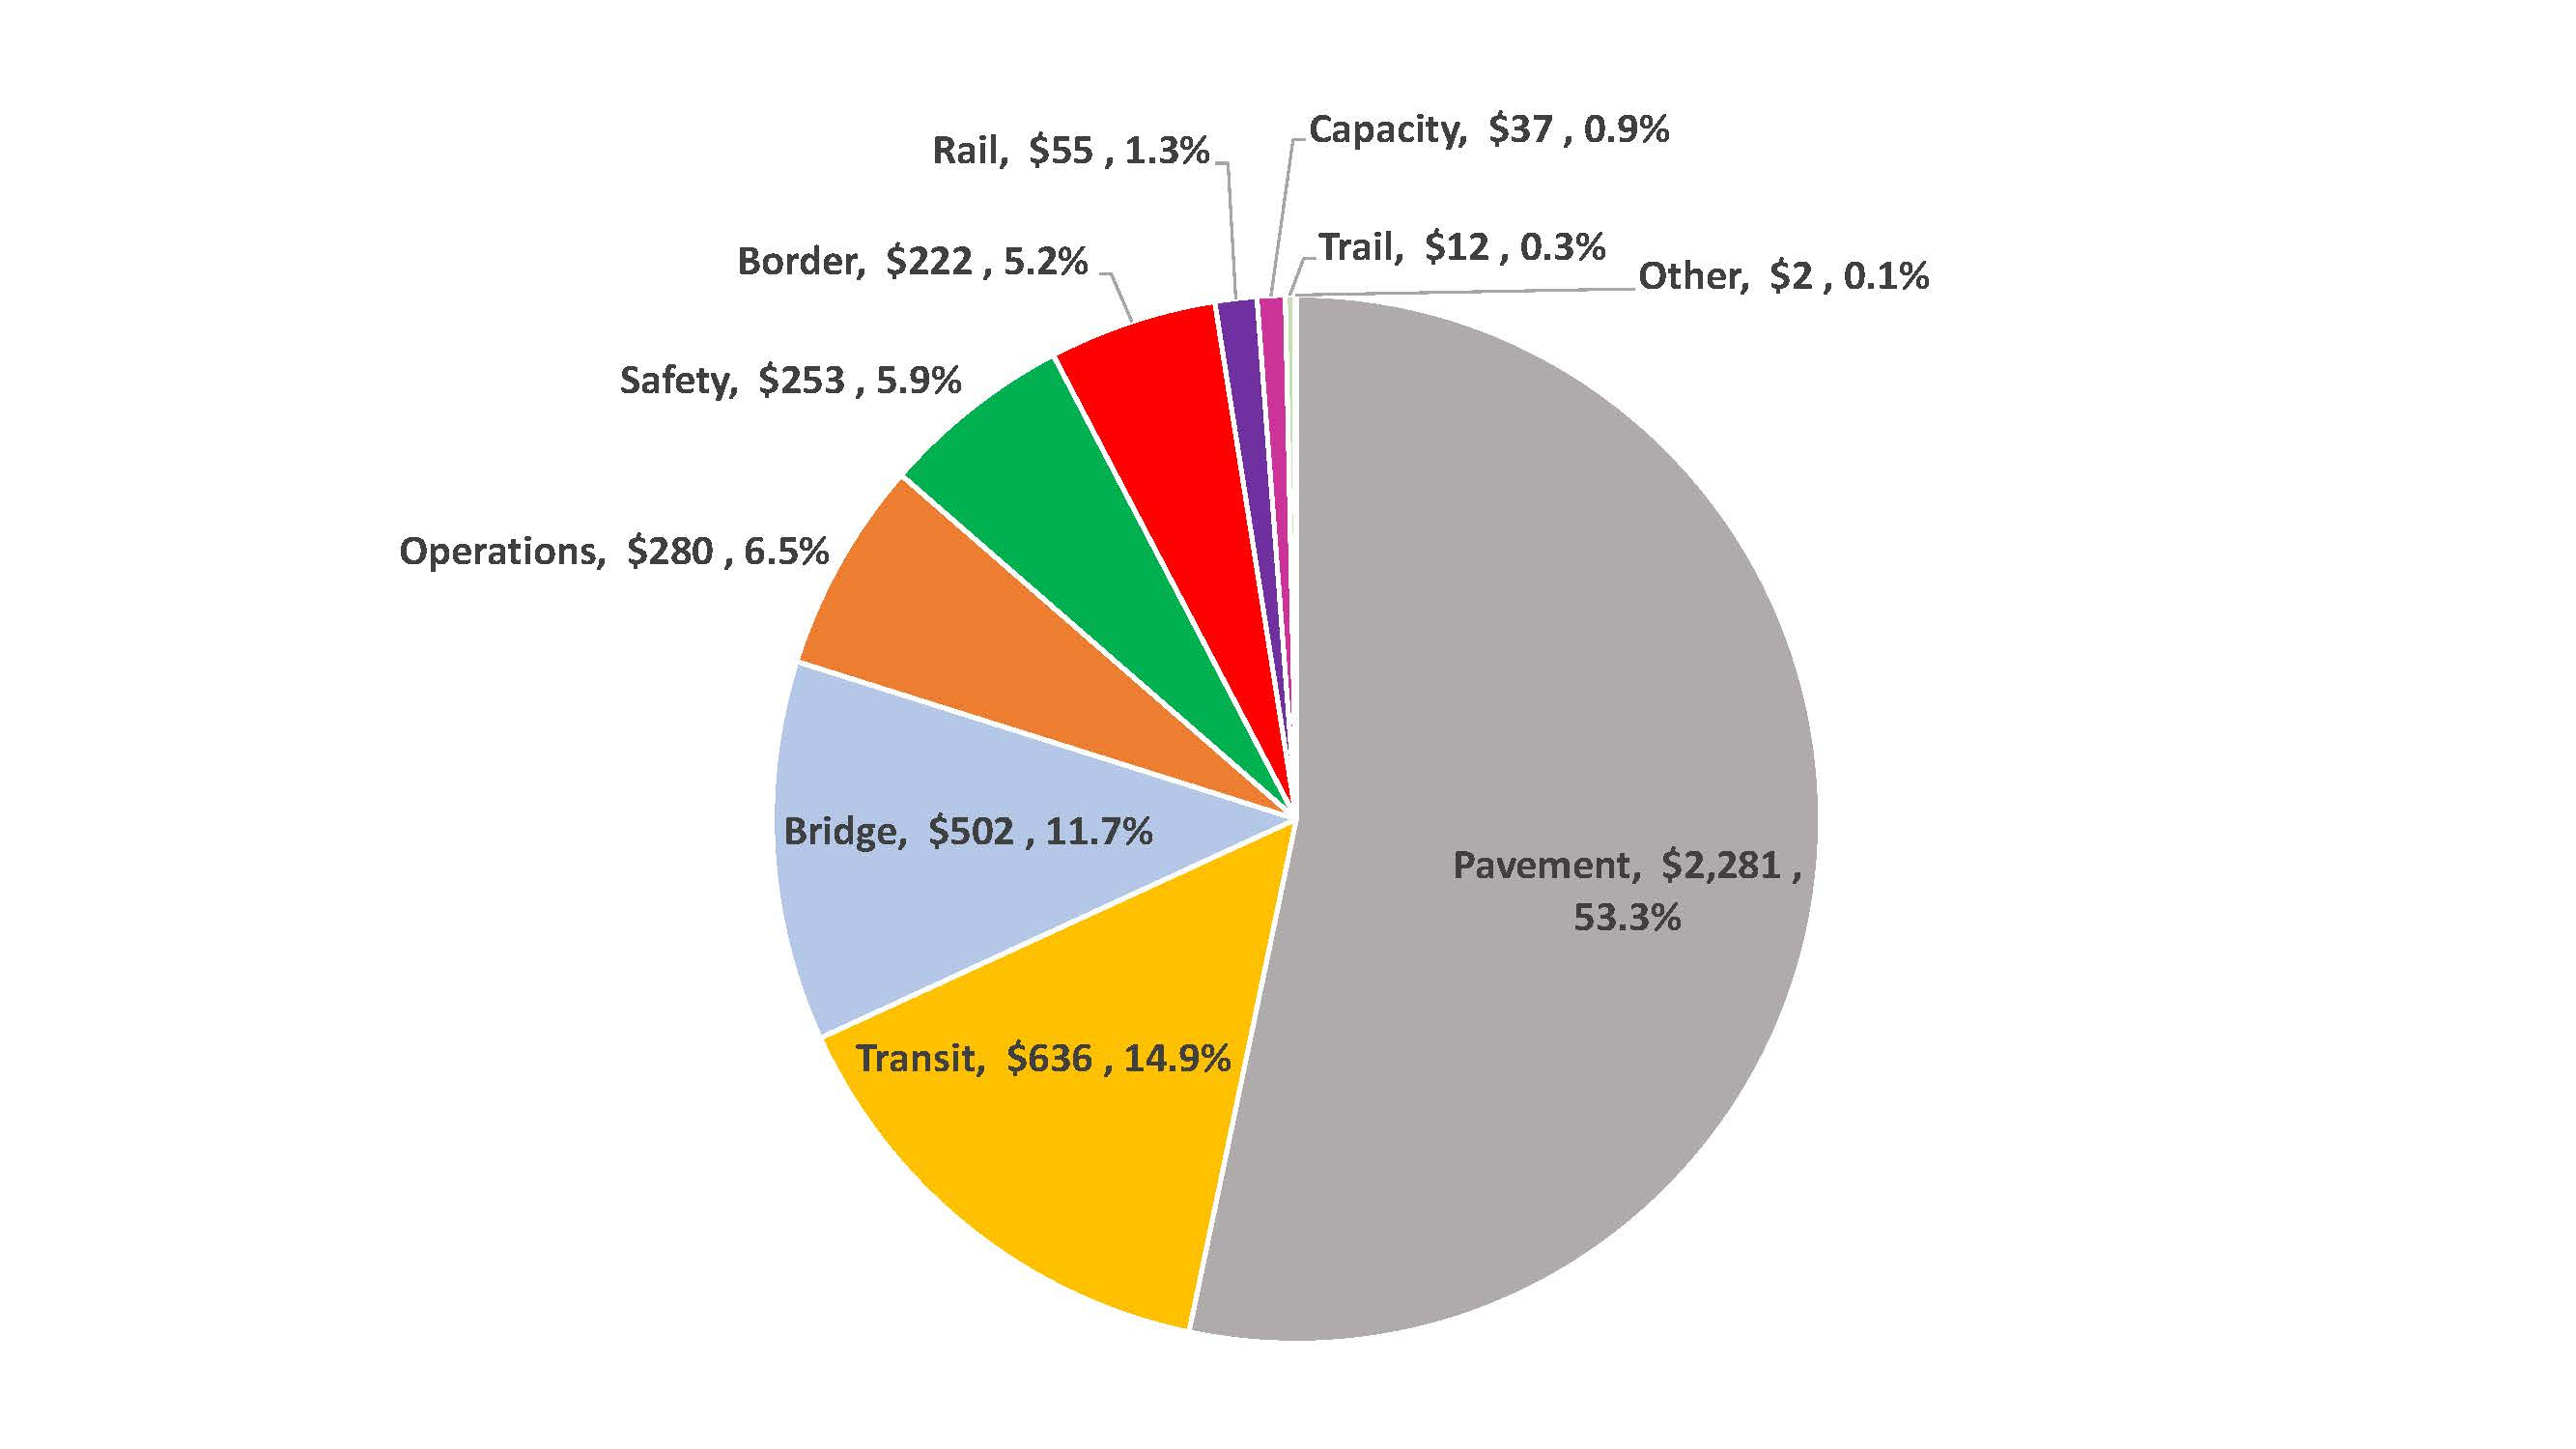 Chart showing distribution of TIP investment by category, data listed below